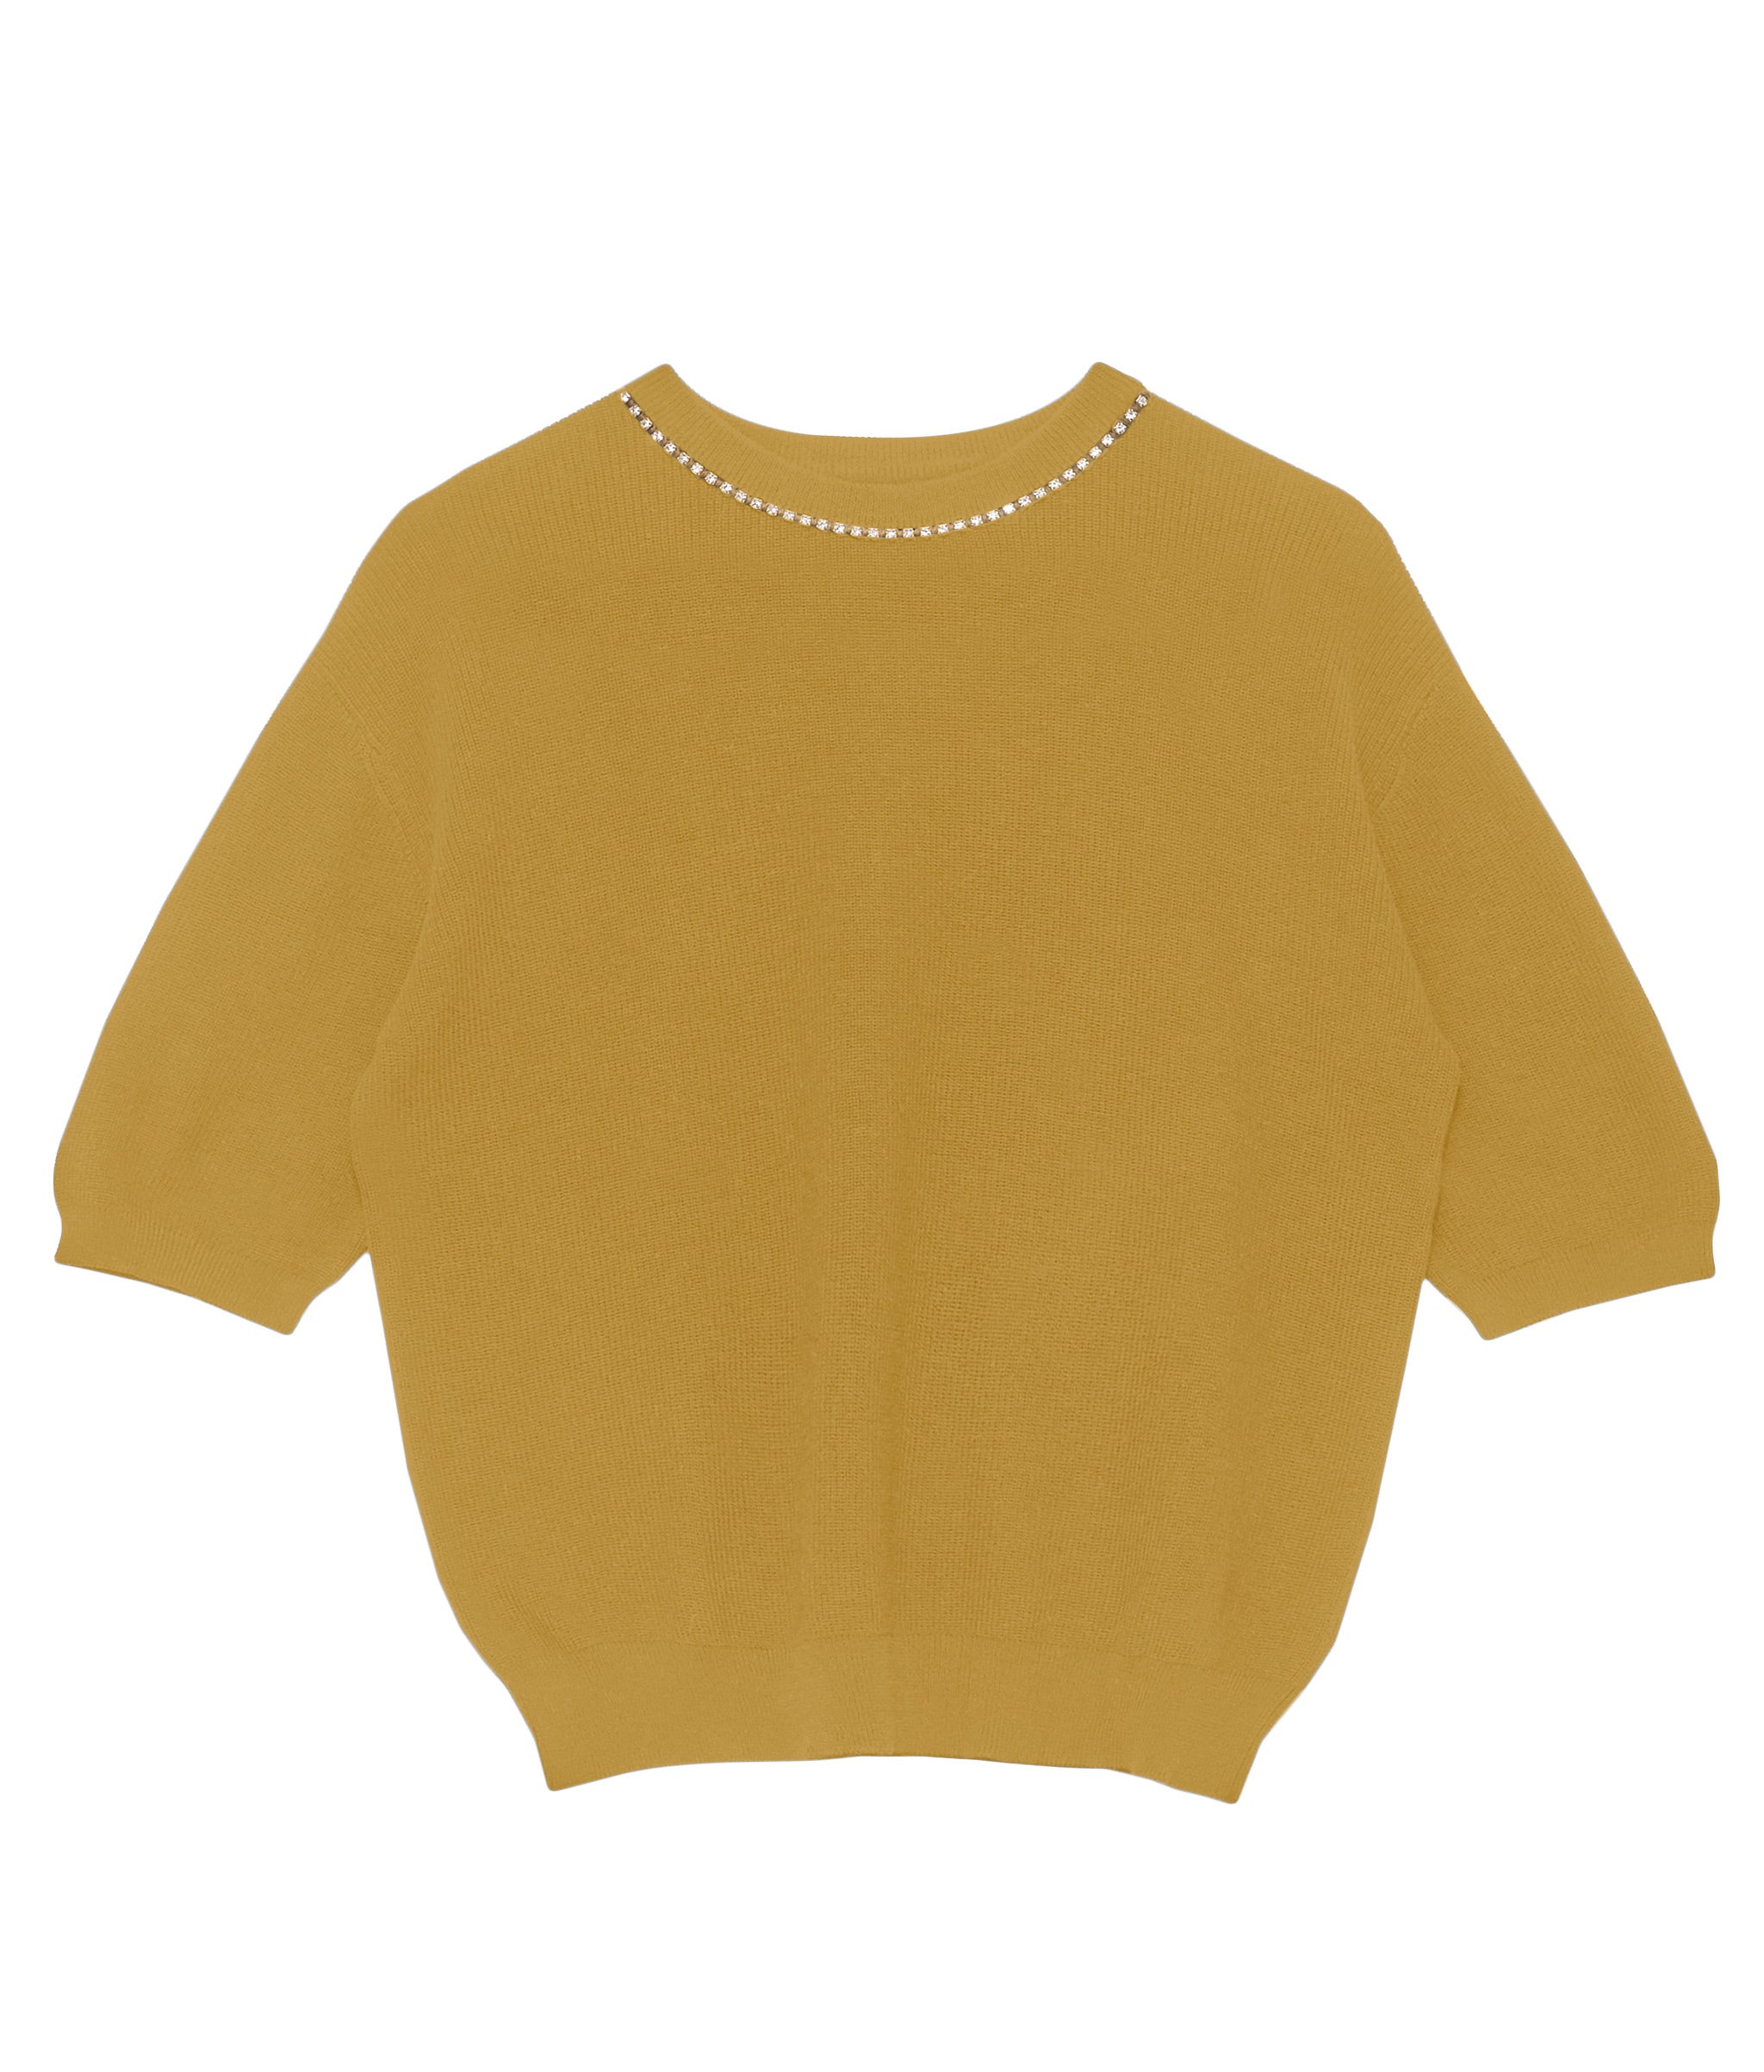 The Uptown Sweater. Butterscotch cotton half sleeve sweater with thread wrapped rhinestone chain necklace.